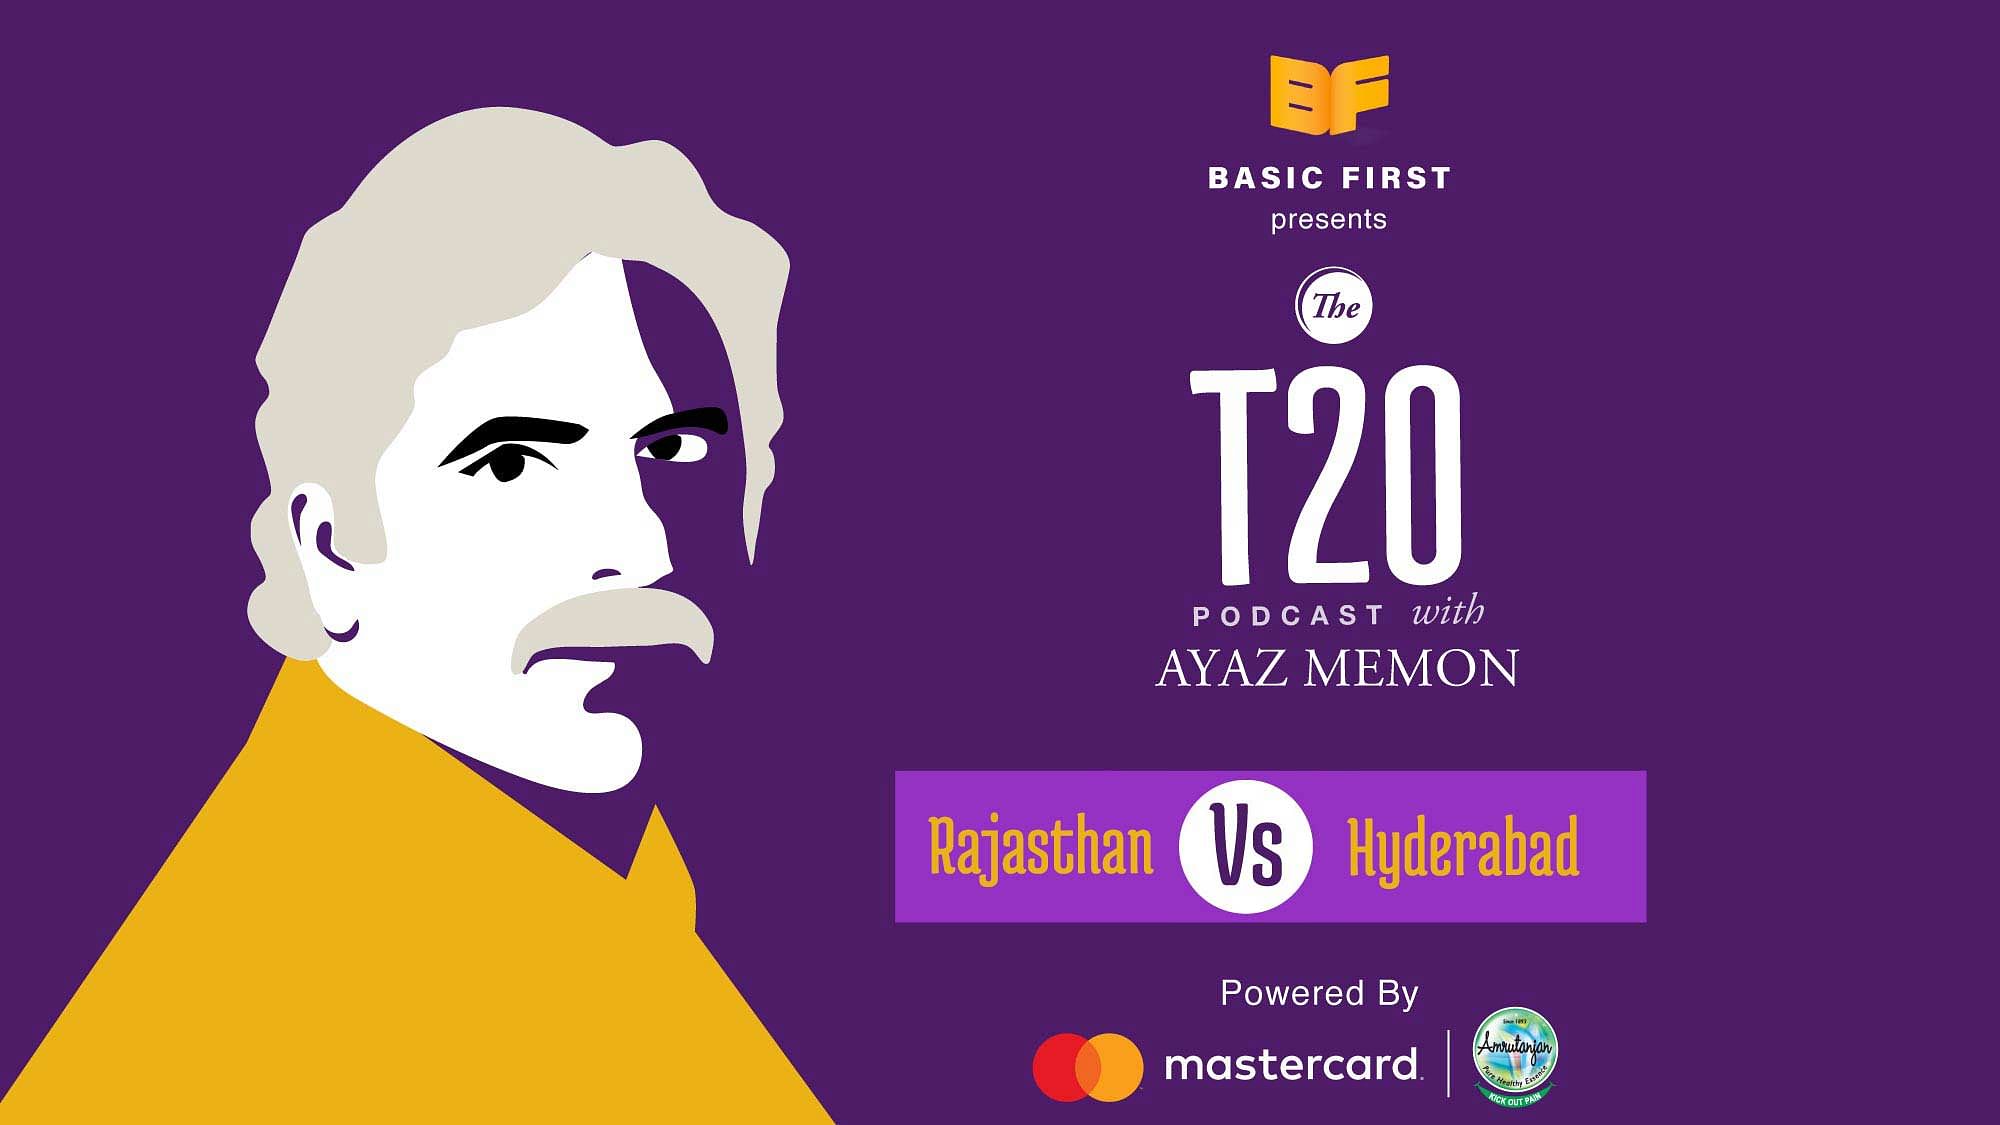 On Episode 40 of The T20 Podcast, Ayaz Memon and Mendra Dorjey talk about Hyderabad’s big 8 wicket win over Rajasthan on Thursday night that helped the team get back into the race for a playoffs berth.